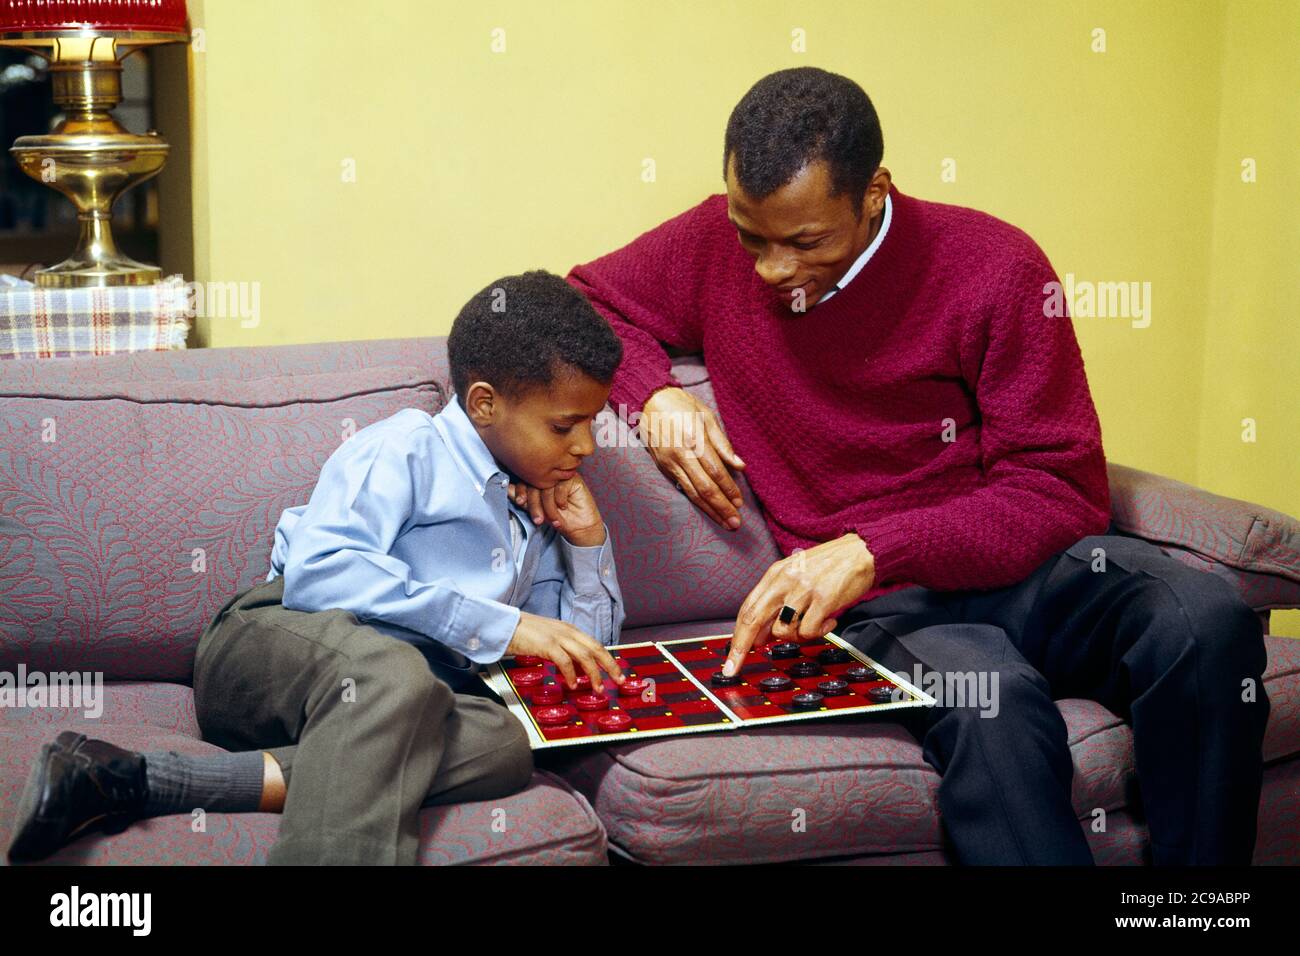 1960s 1970s AFRICAN-AMERICAN FATHER AND SON SITTING ON COUCH PLAYING CHECKERS GAME FATHER HELPING POINTING TO A POTENTIAL MOVE - kj5656 PHT001 HARS PAIR COLOR OLD TIME TEACHING NOSTALGIA OLD FASHION 1 JUVENILE COUCH STYLE COMMUNICATION COMPETITION STRONG SONS FAMILIES JOY LIFESTYLE PARENTING HOME LIFE COPY SPACE FRIENDSHIP HALF-LENGTH PERSONS CARING MALES FATHERS CHECKERS MOVE HAPPINESS HIGH ANGLE STRATEGY AFRICAN-AMERICANS AFRICAN-AMERICAN AND DADS SLACKS BLACK ETHNICITY PRIDE POTENTIAL CONNECTION CAREGIVER PERSONAL ATTACHMENT AFFECTION BOARD GAME COOPERATION EMOTION JUVENILES MID-ADULT Stock Photo